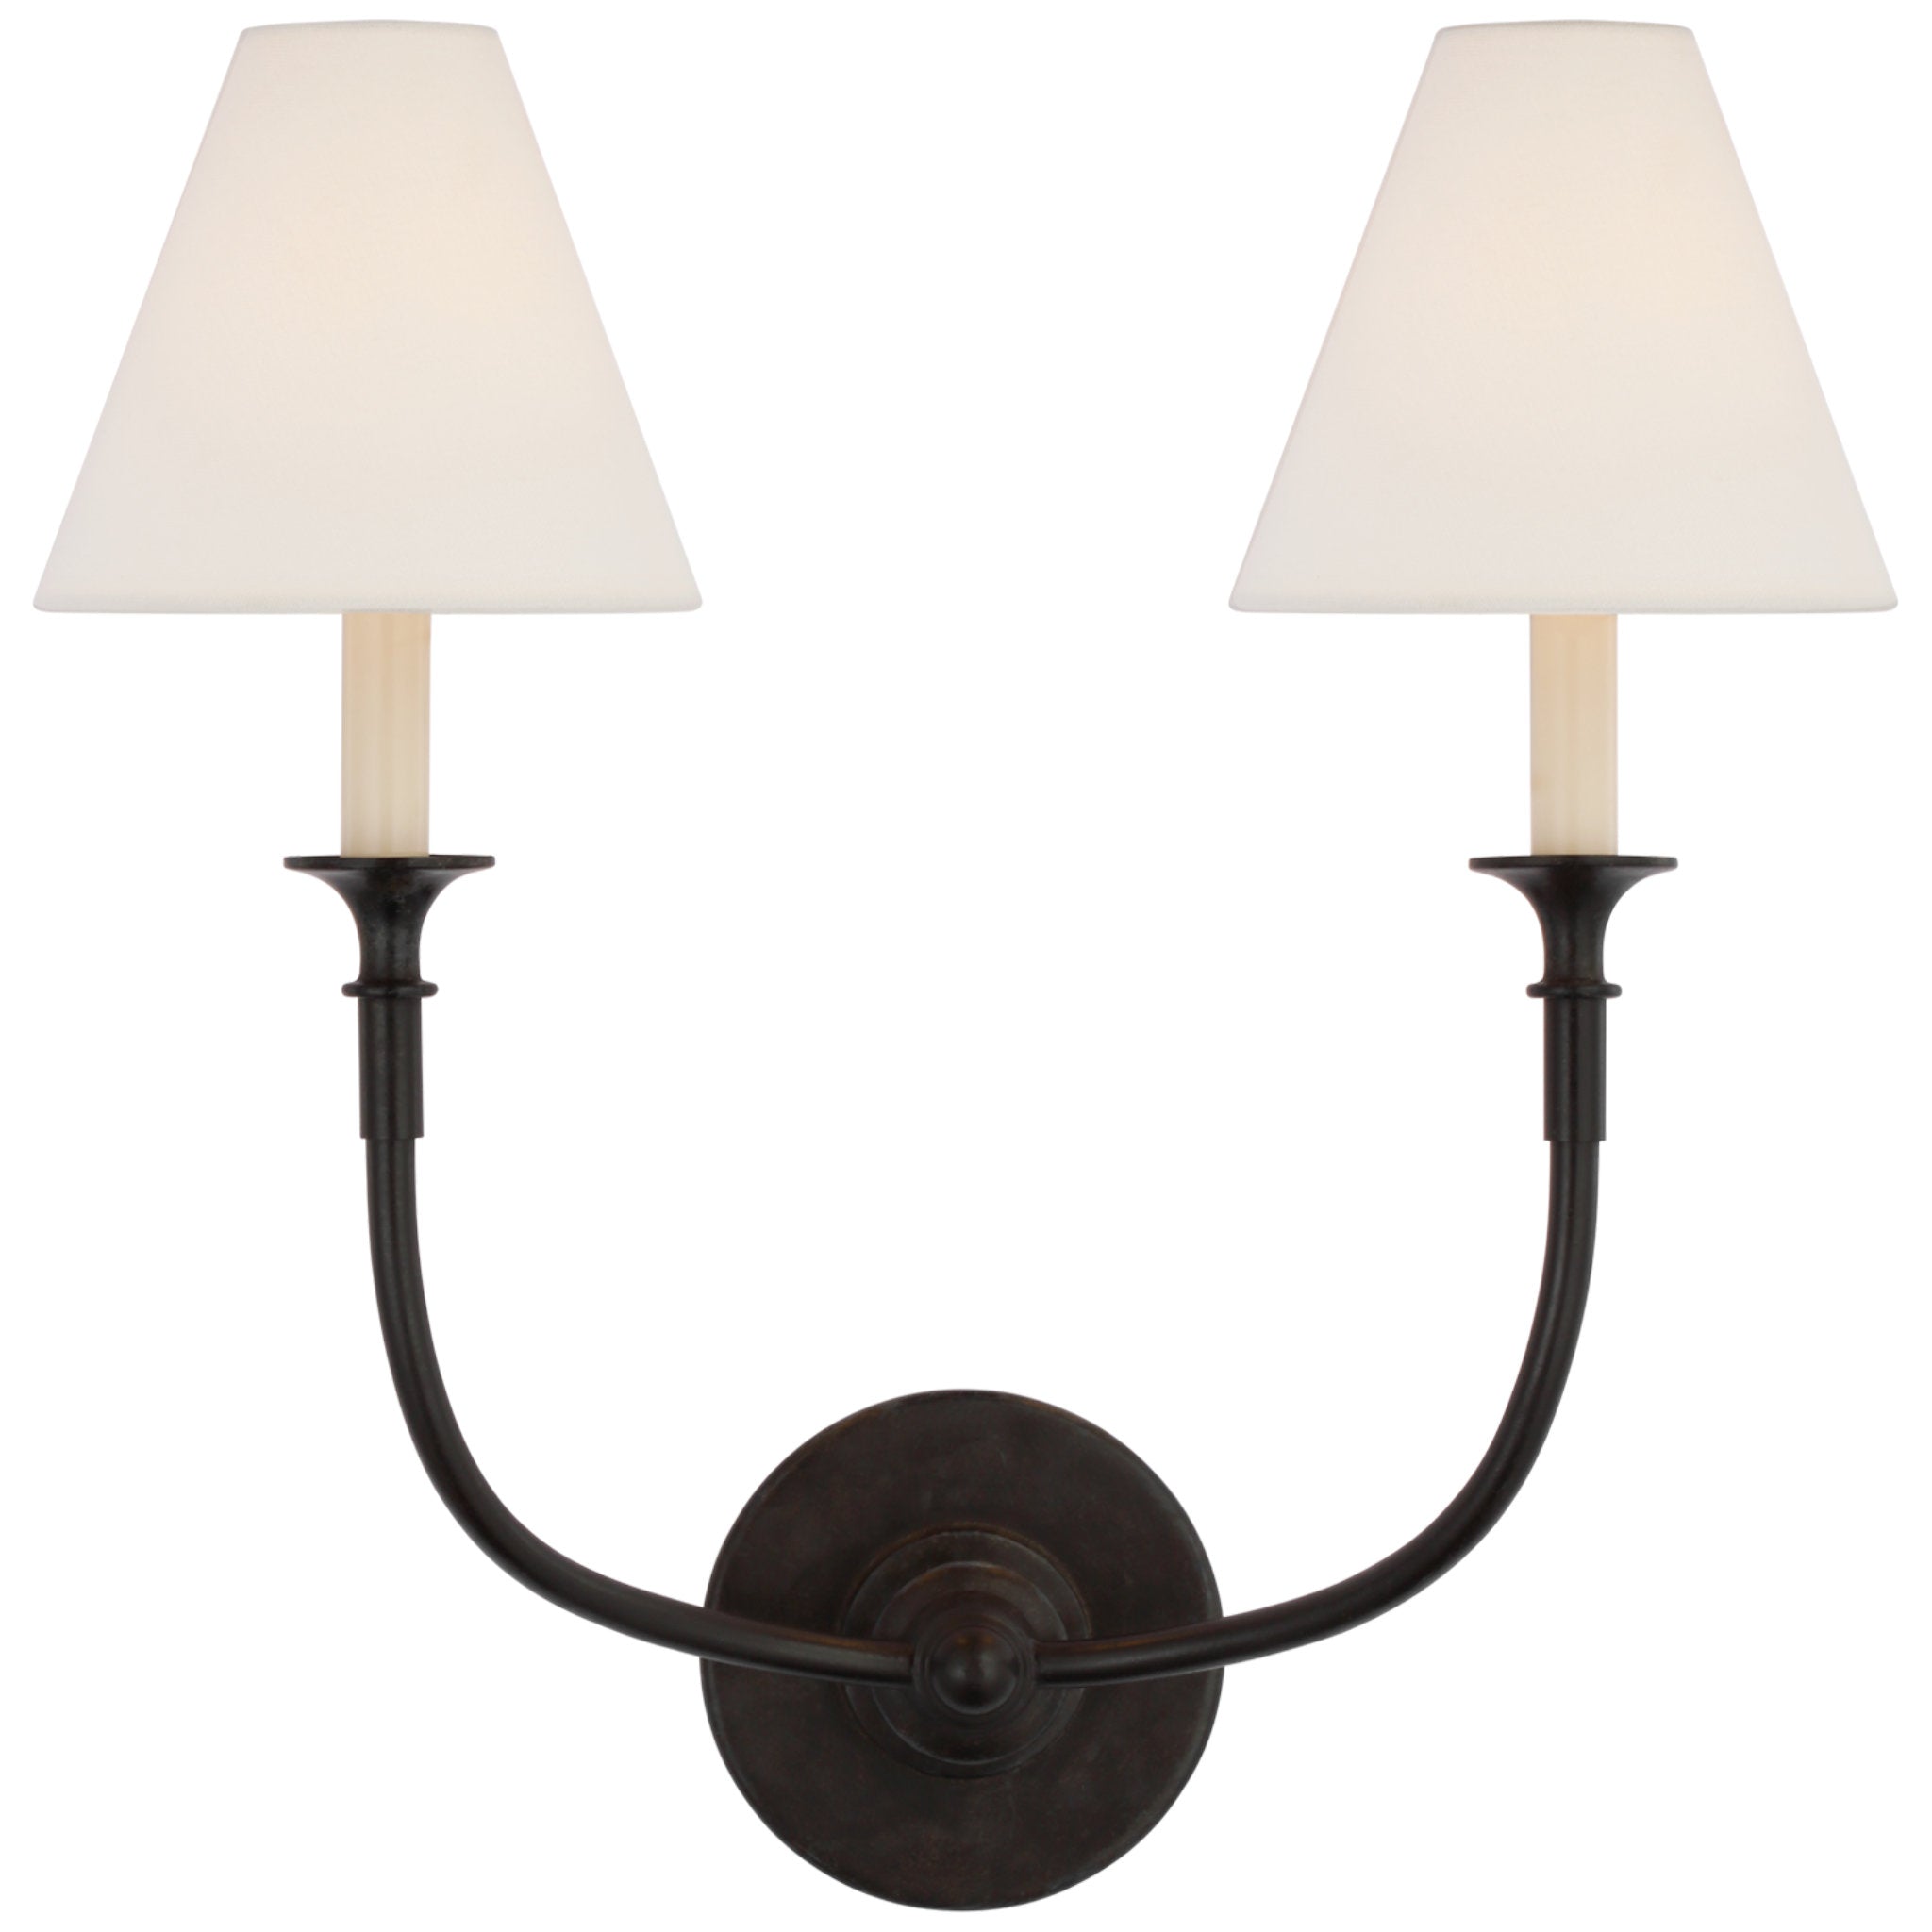 Thomas O'Brien Piaf Double Sconce in Aged Iron with Linen Shades